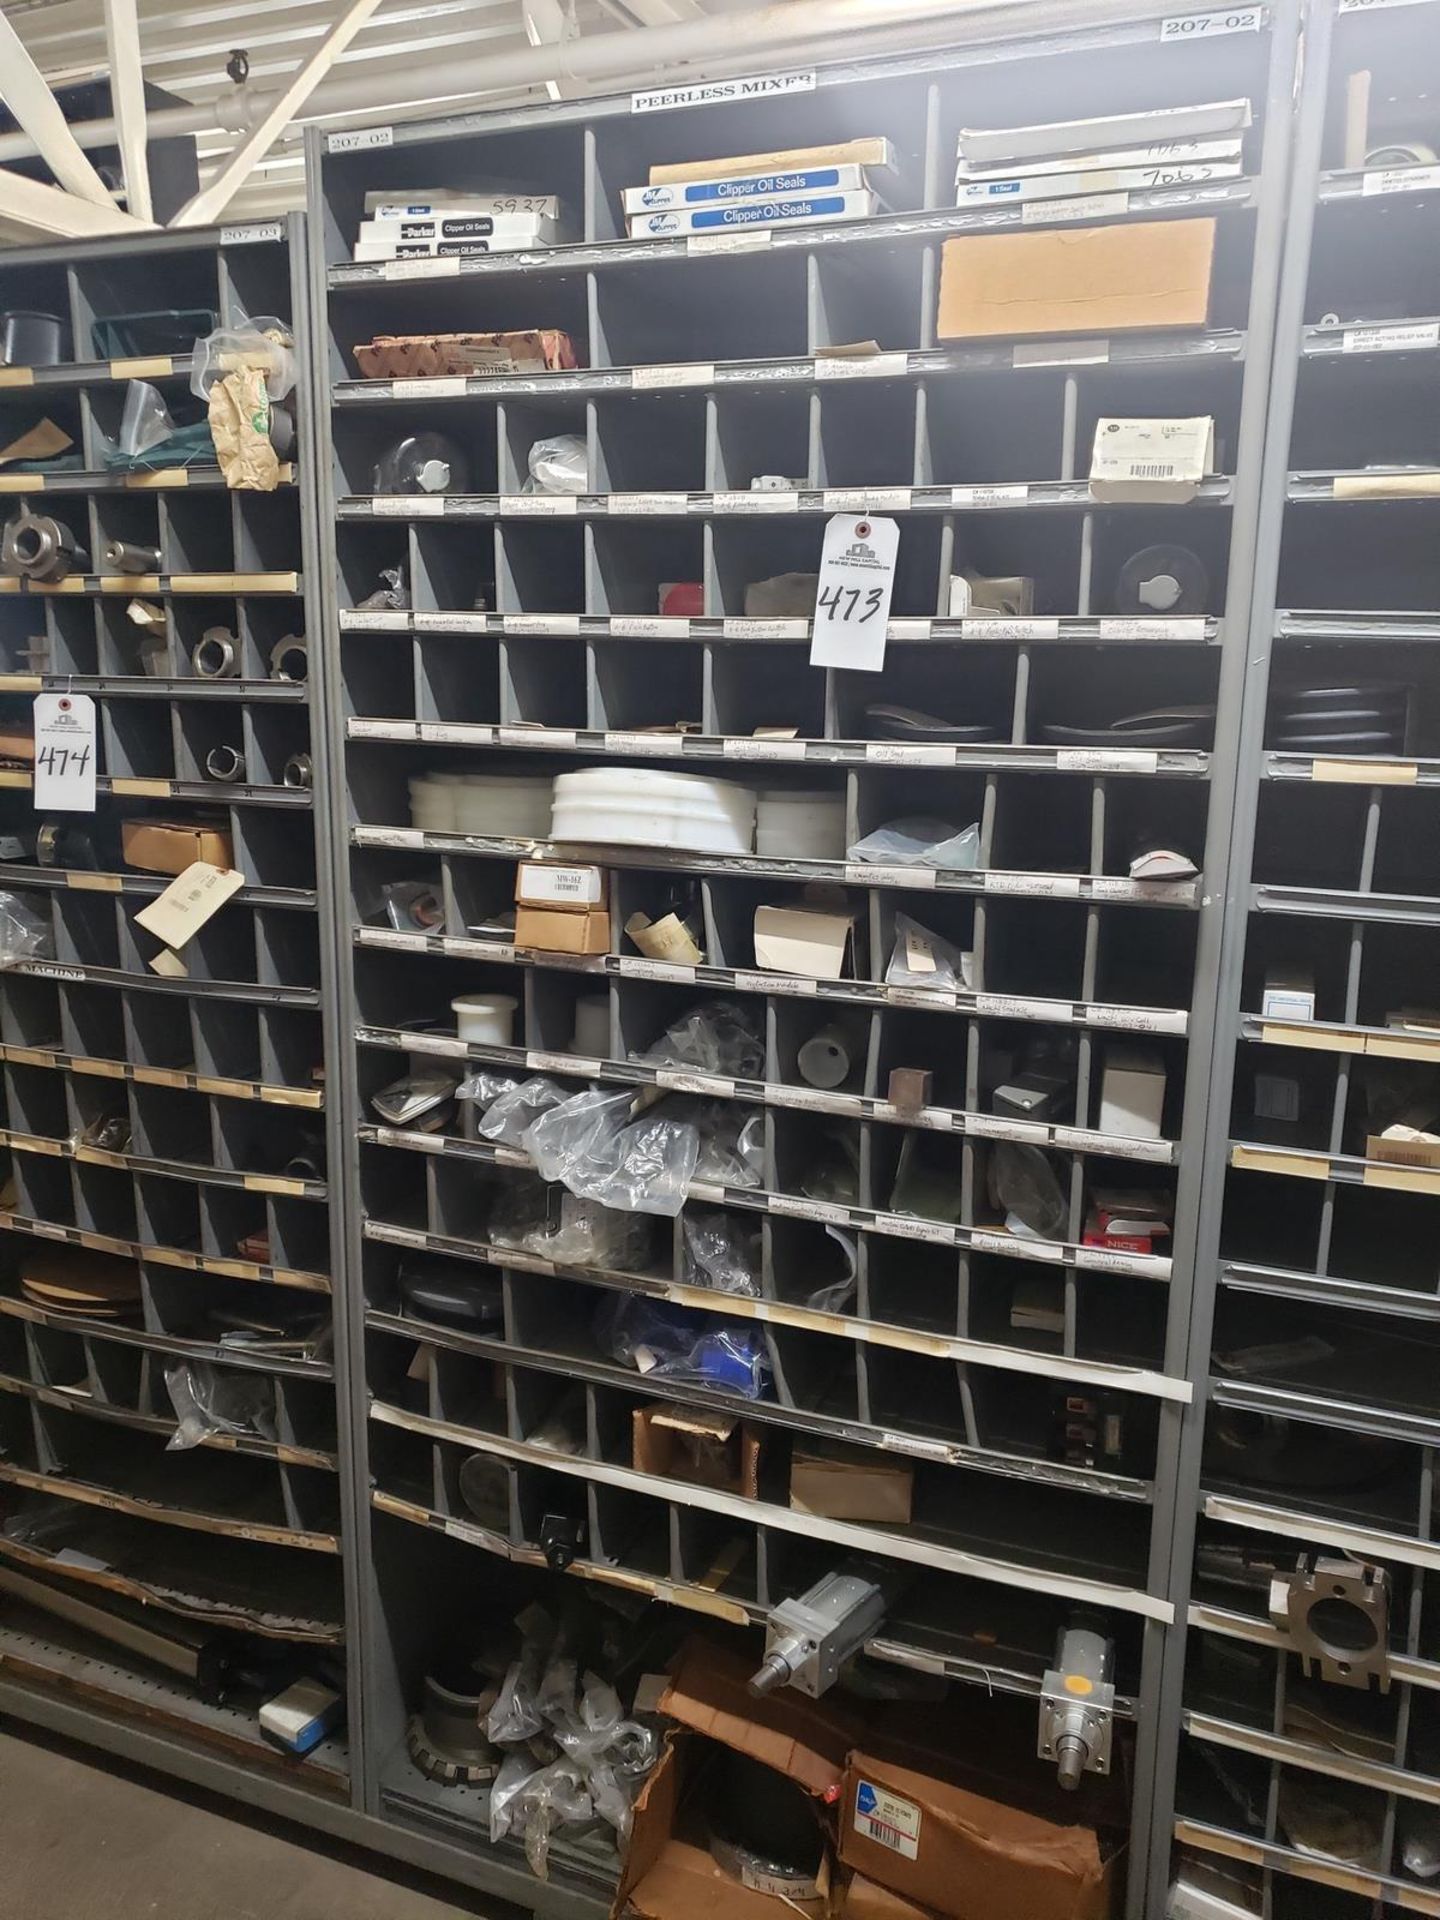 Contents of Storage Shelf Section, Spare Parts